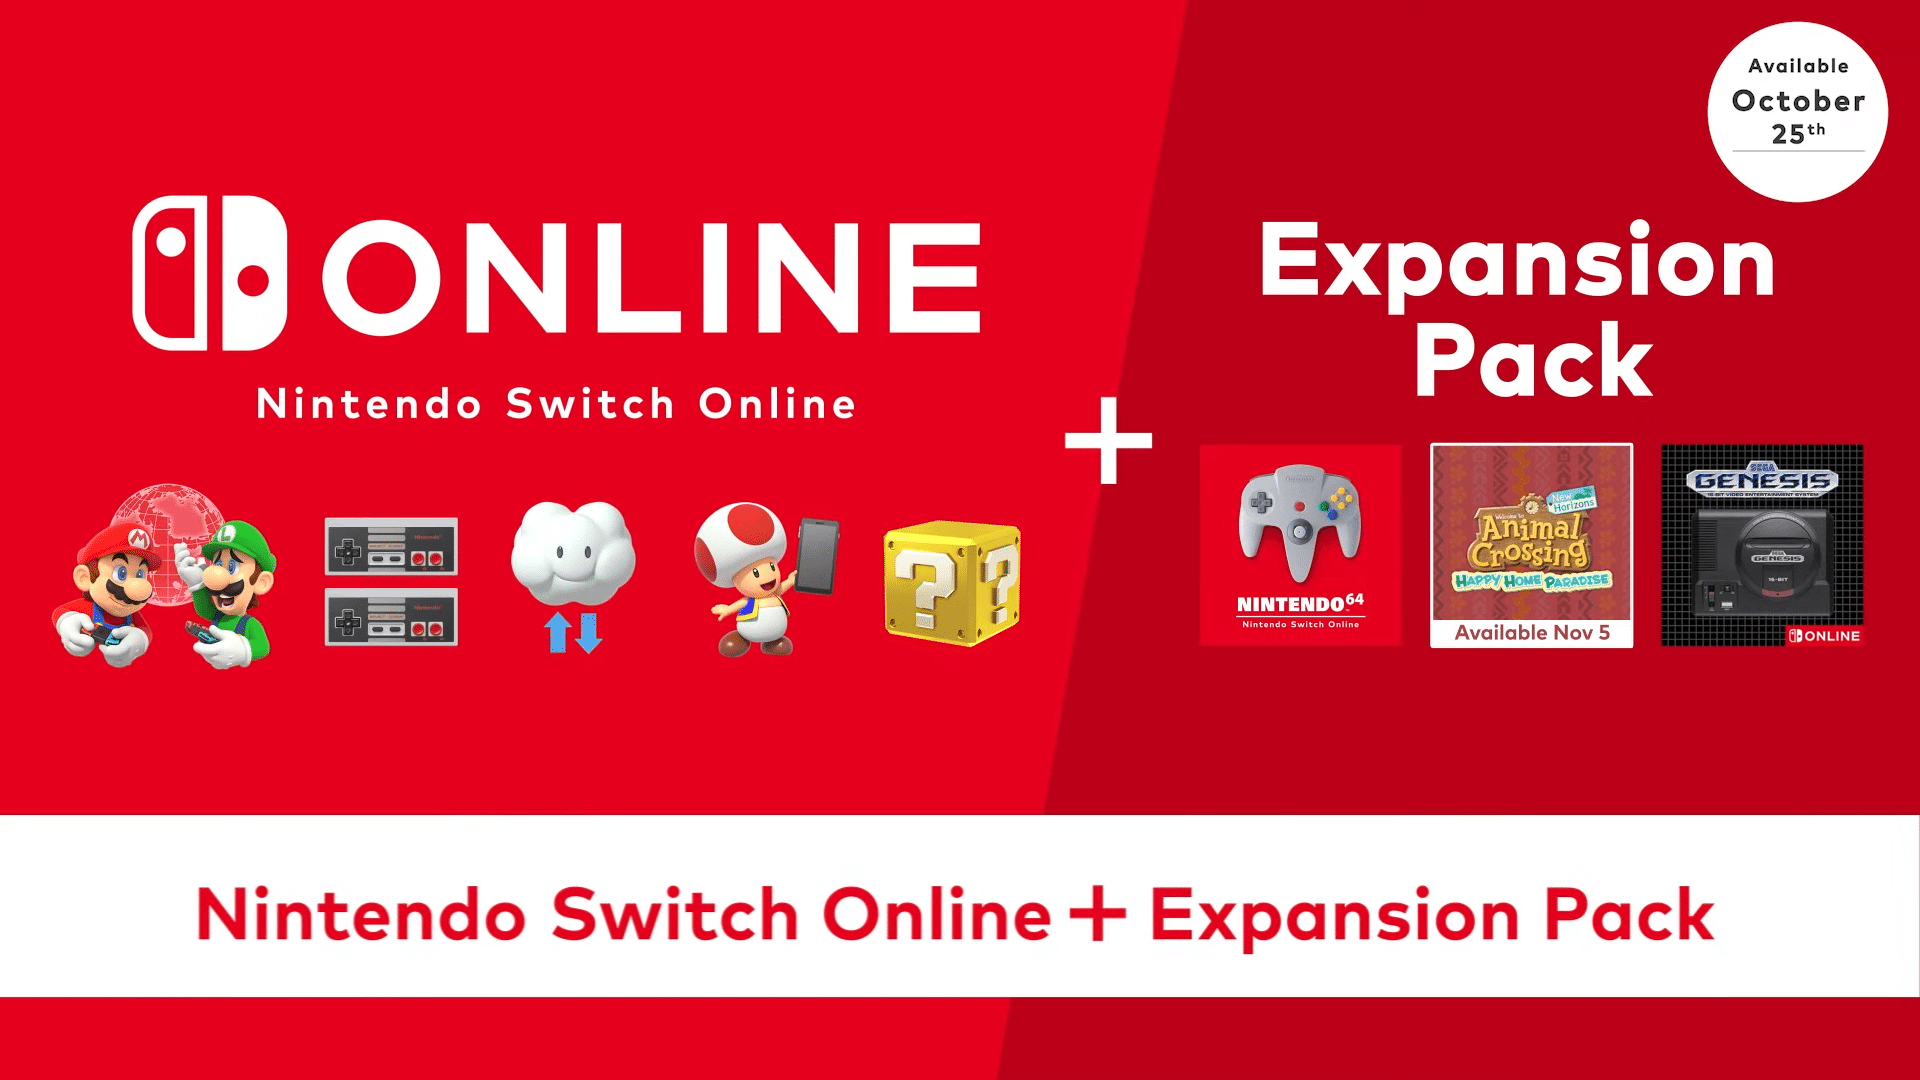 Nintendo Shares Switch Online + Expansion Pack Game Details and Pricing: $49.99 For Individual Membership, Releasing Late October